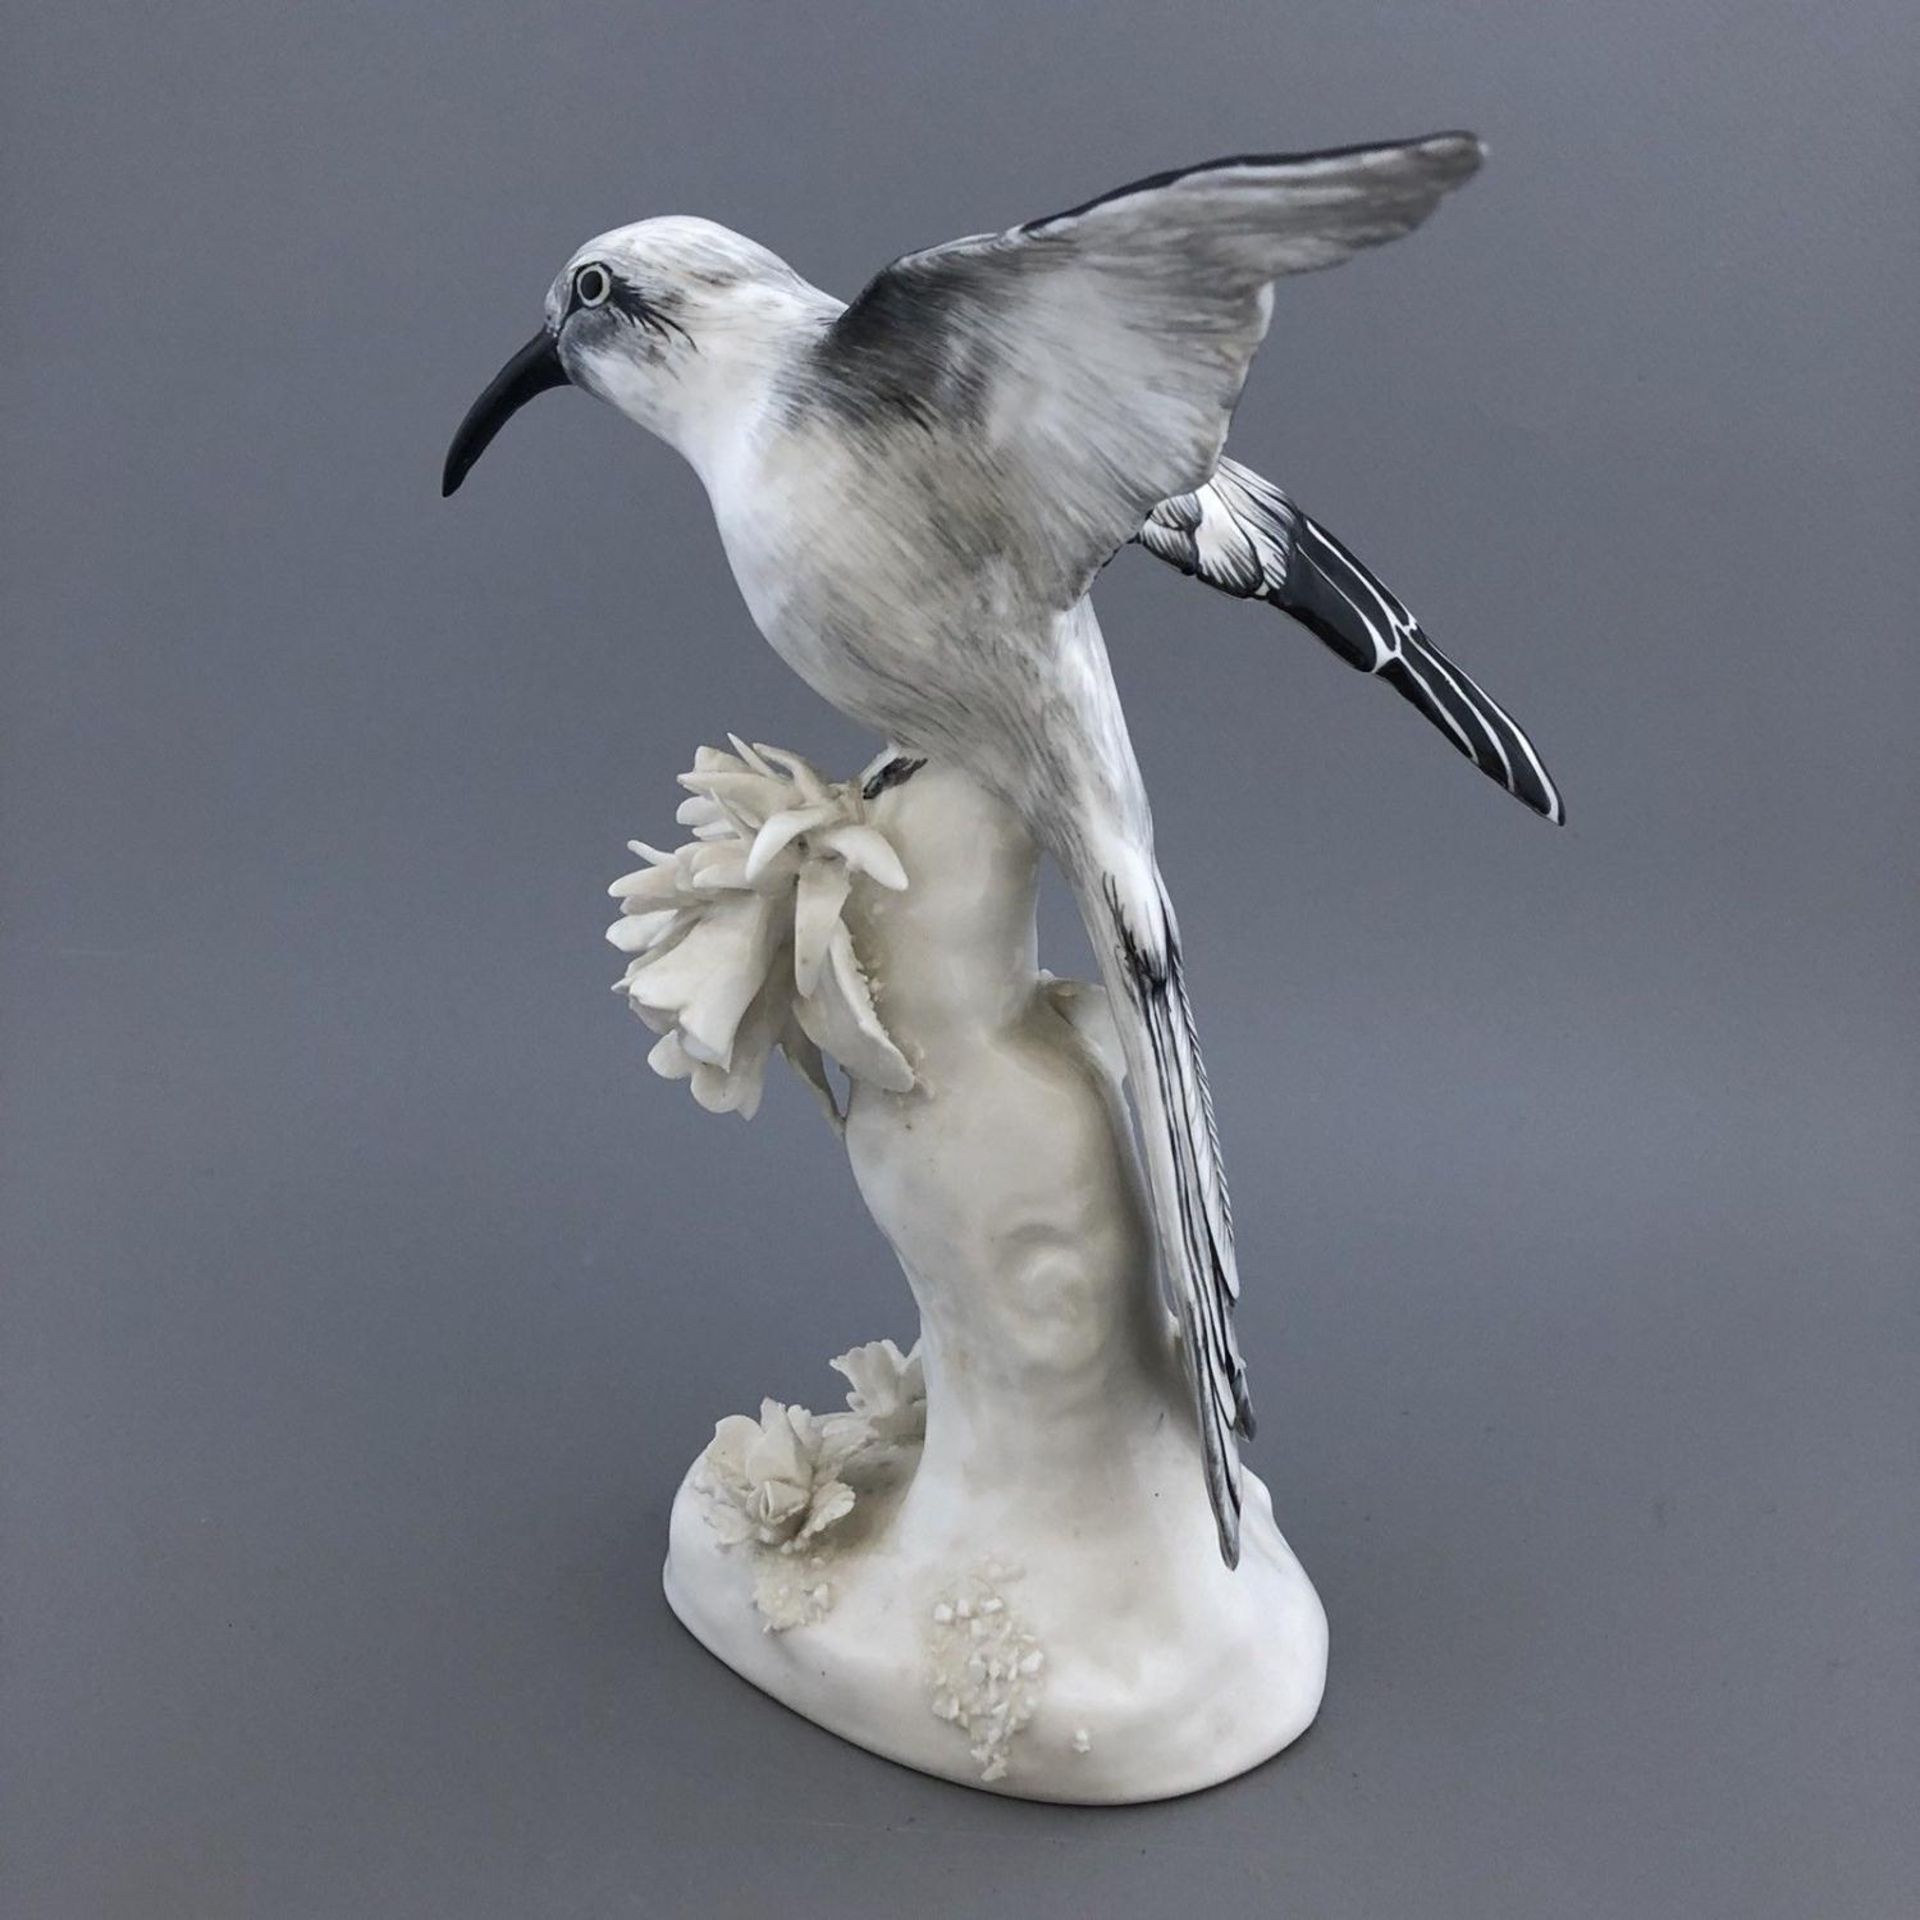 English Porcelain Bee Eater Bird Figurine by J T Jones for Crown Staffordshire - Image 4 of 6